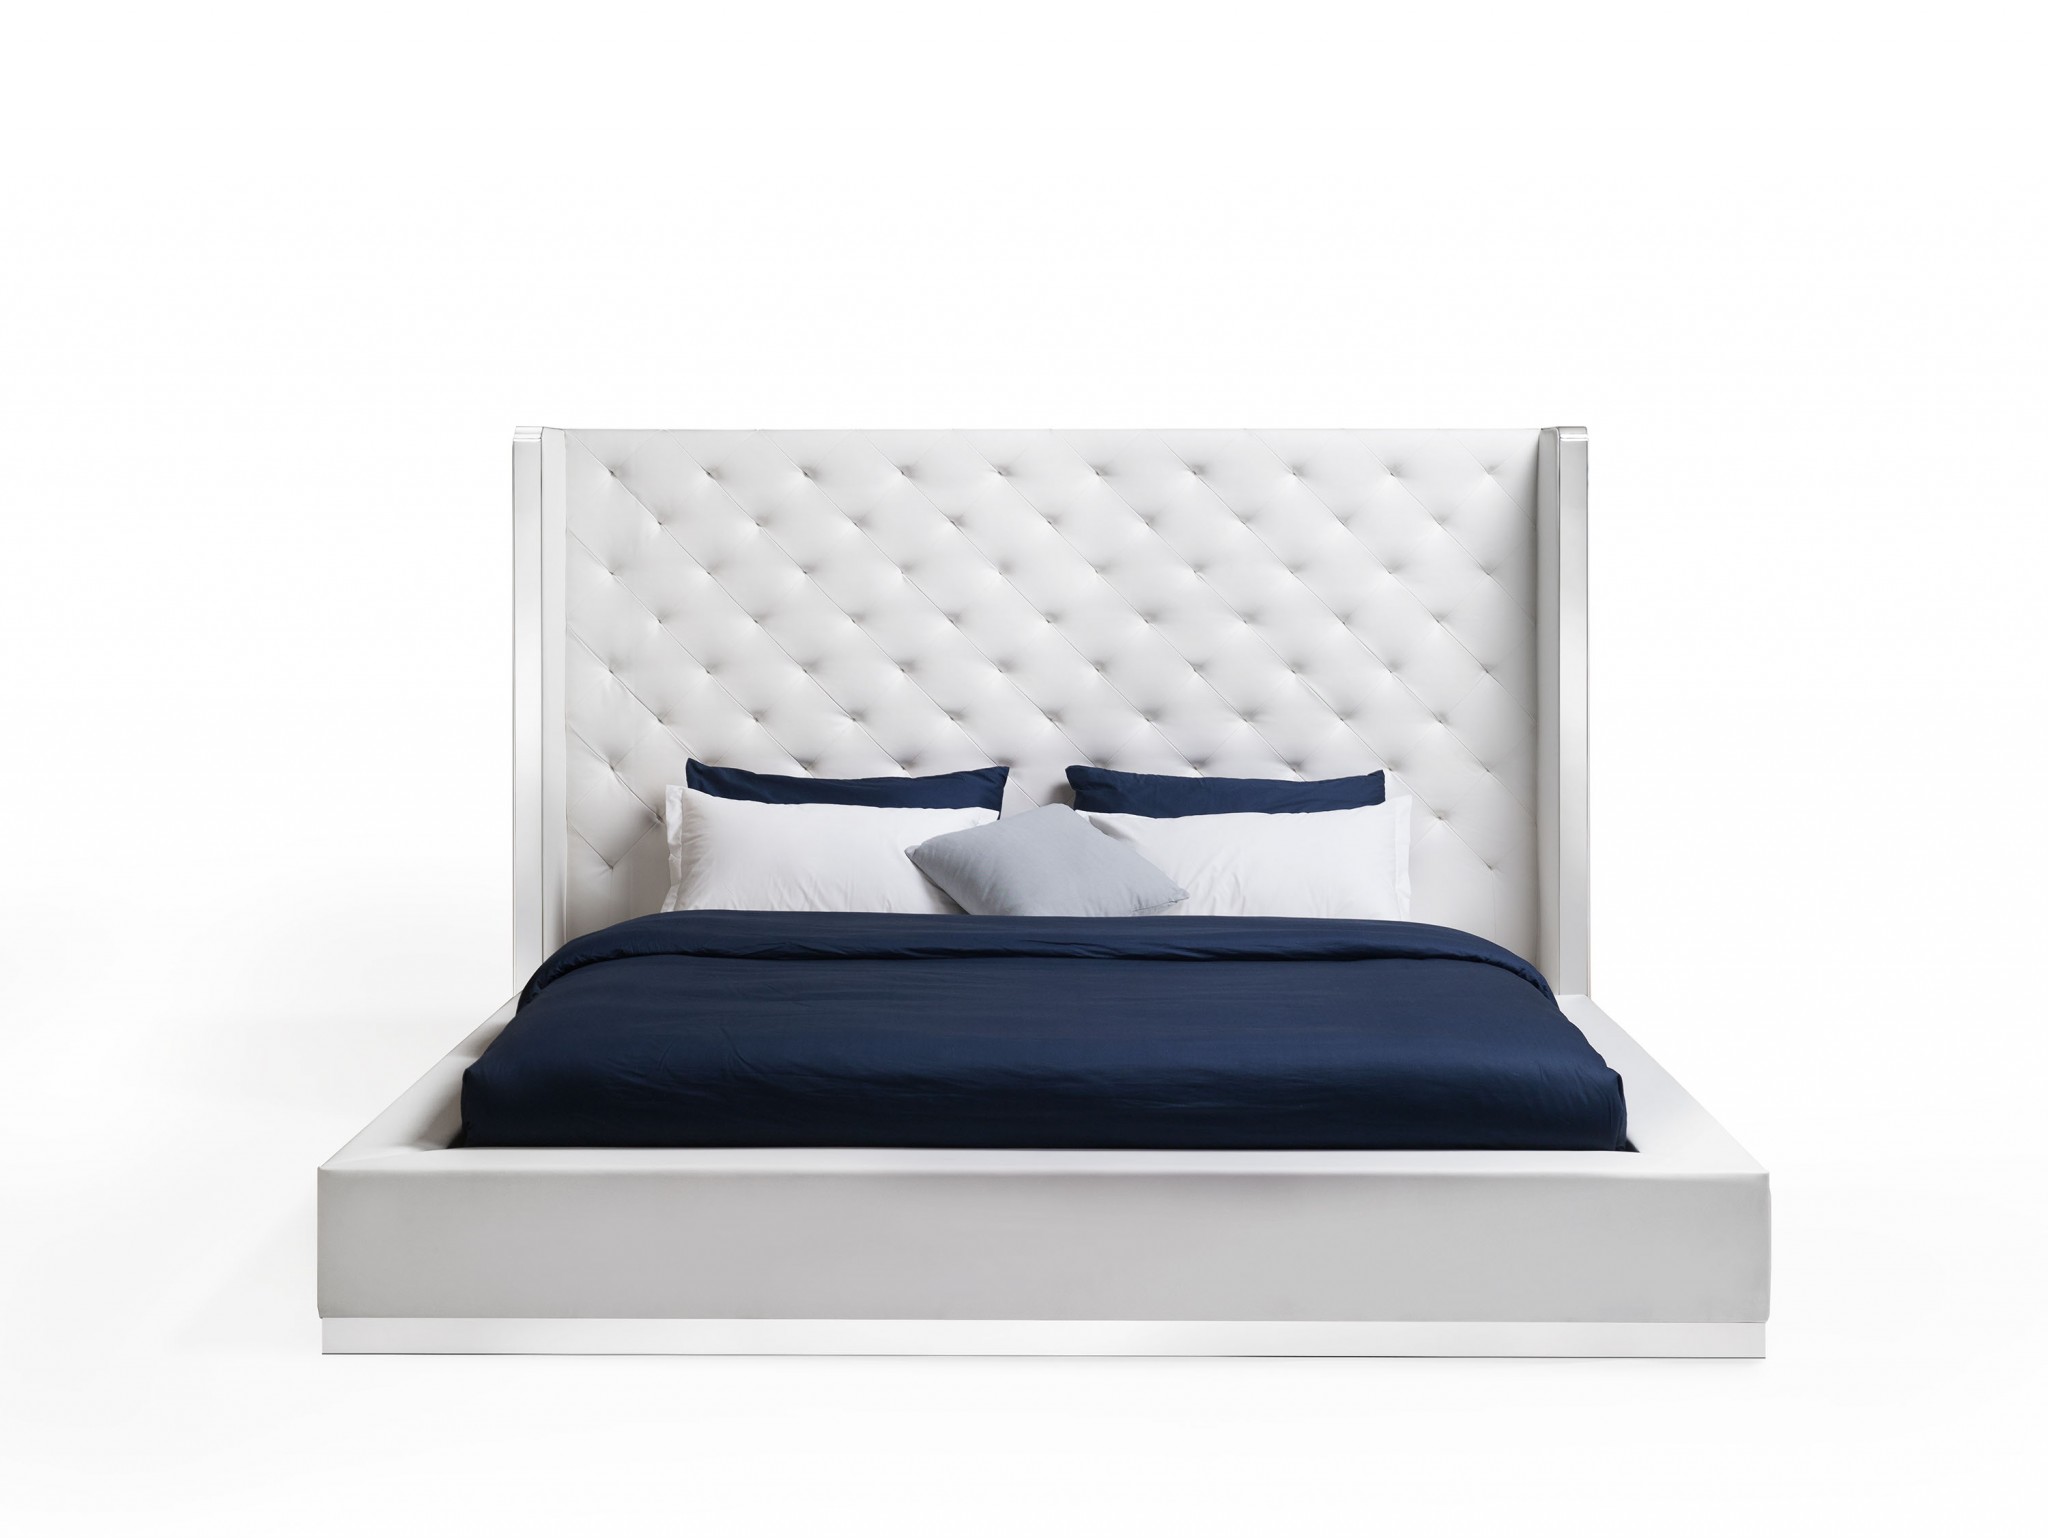 60" X 91" X 91" White Faux Leather Bed King